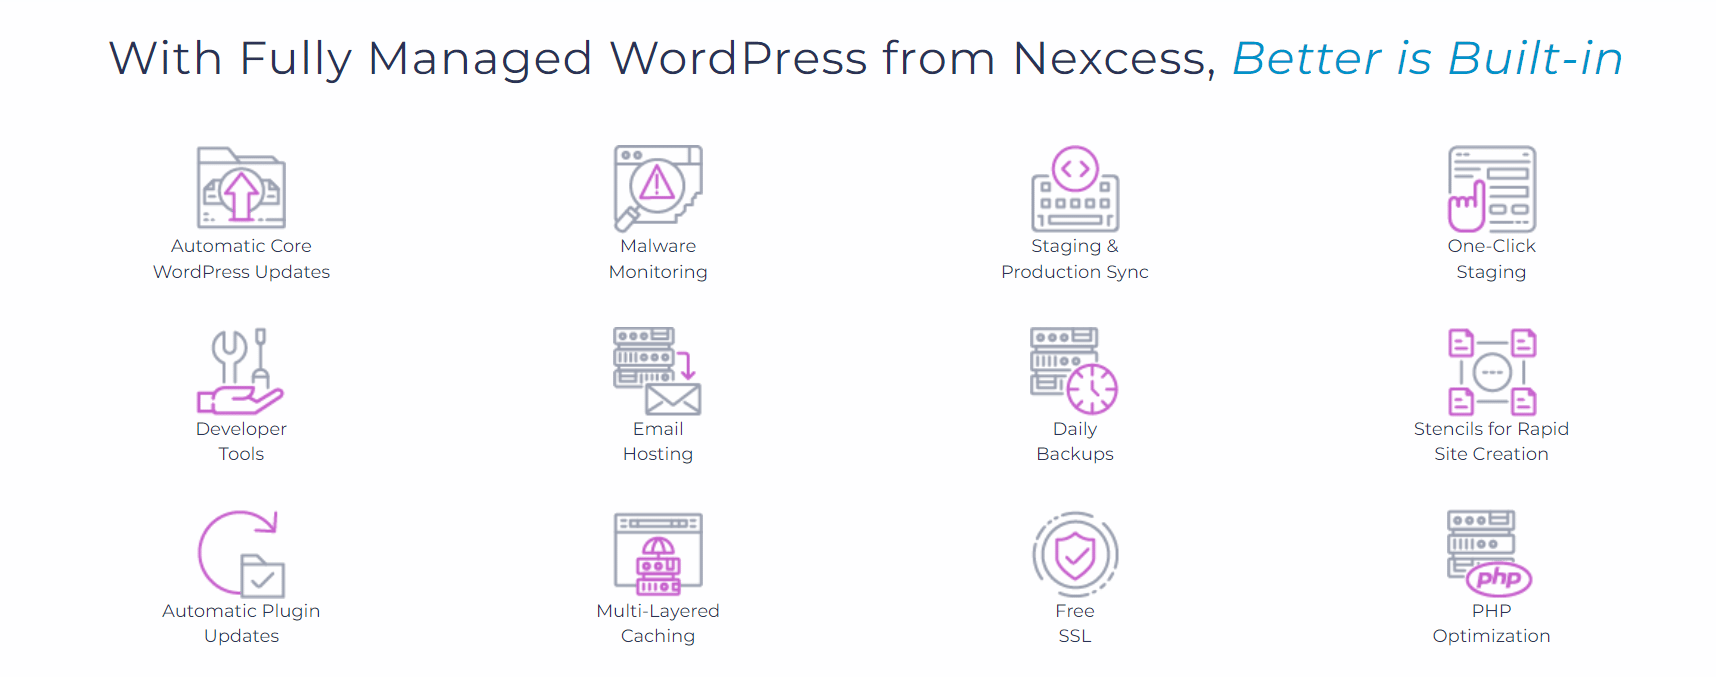 nexcess hosting features